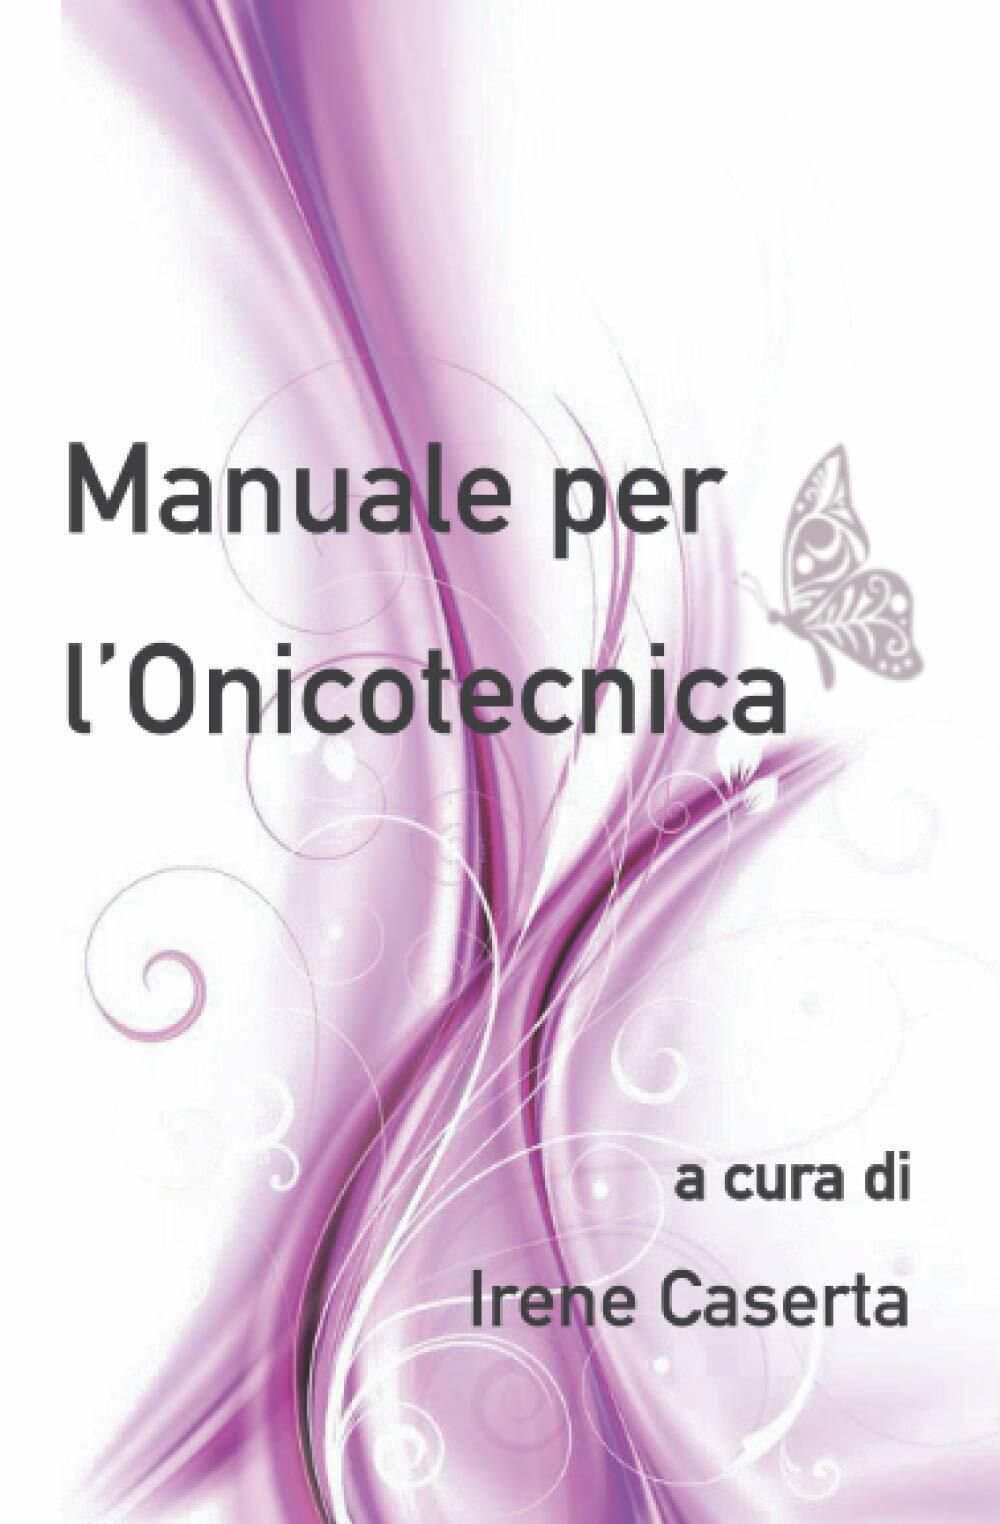 MANUALE PER L'ONICOTECNICA di Irene Caserta,  2020,  Indipendently Published